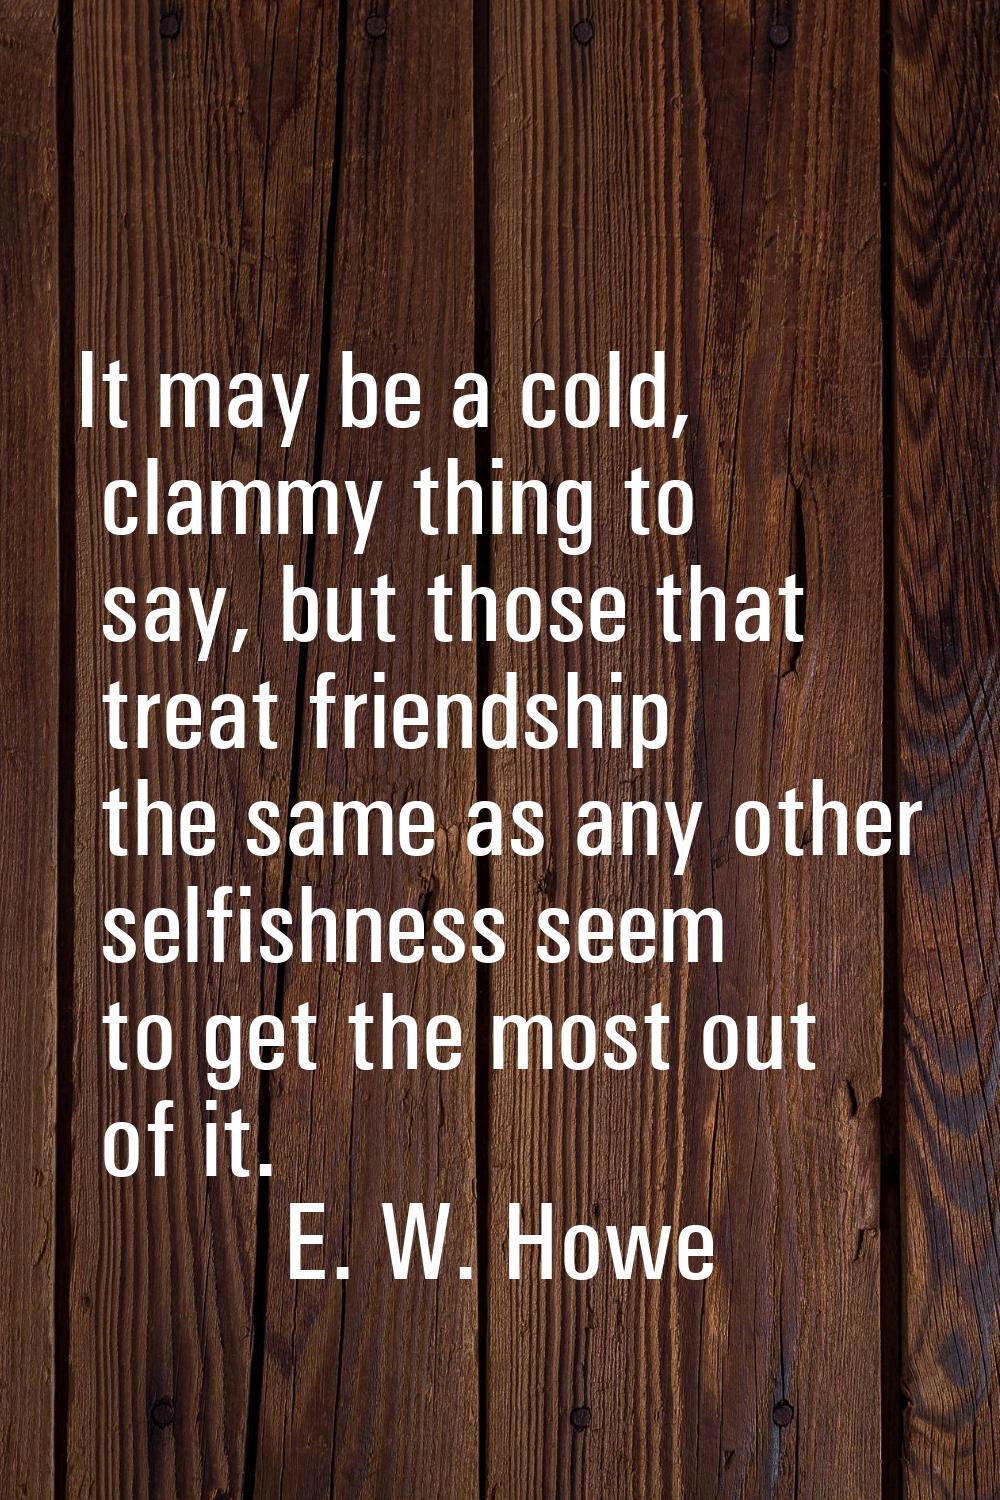 It may be a cold, clammy thing to say, but those that treat friendship the same as any other selfis